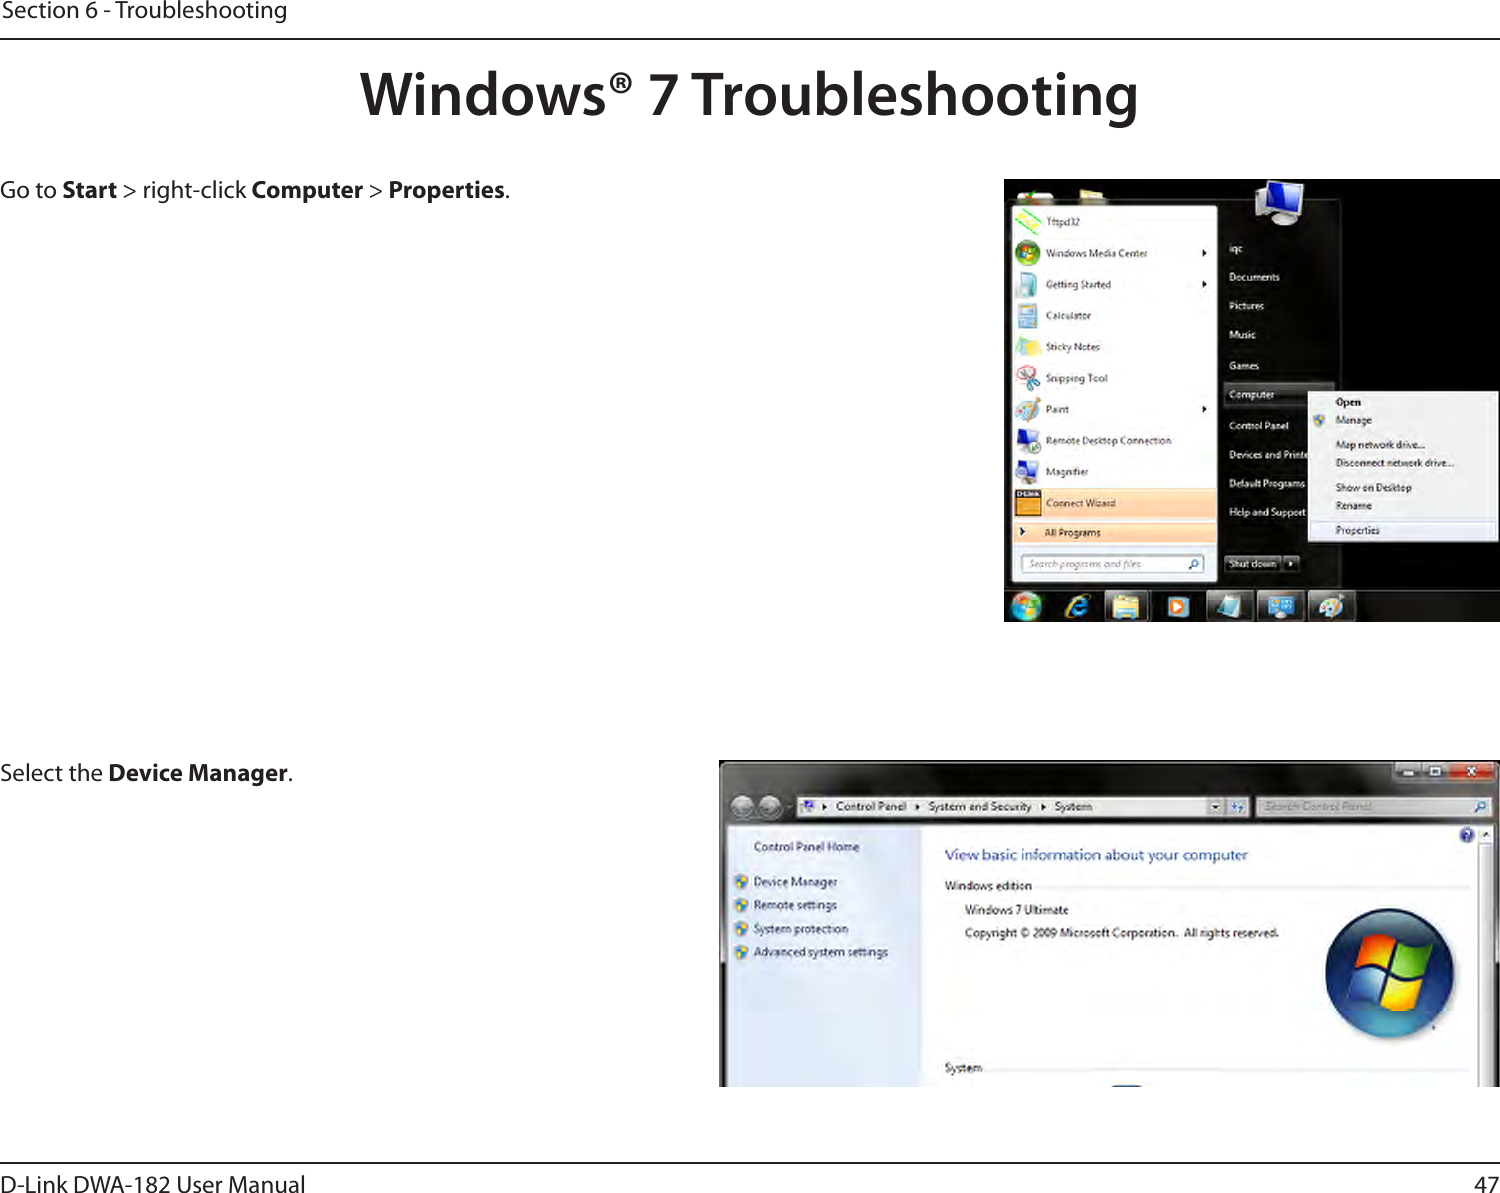 47D-Link DWA-182 User ManualSection 6 - TroubleshootingWindows® 7 TroubleshootingGo to Start &gt; right-click Computer &gt; Properties.Select the Device Manager.